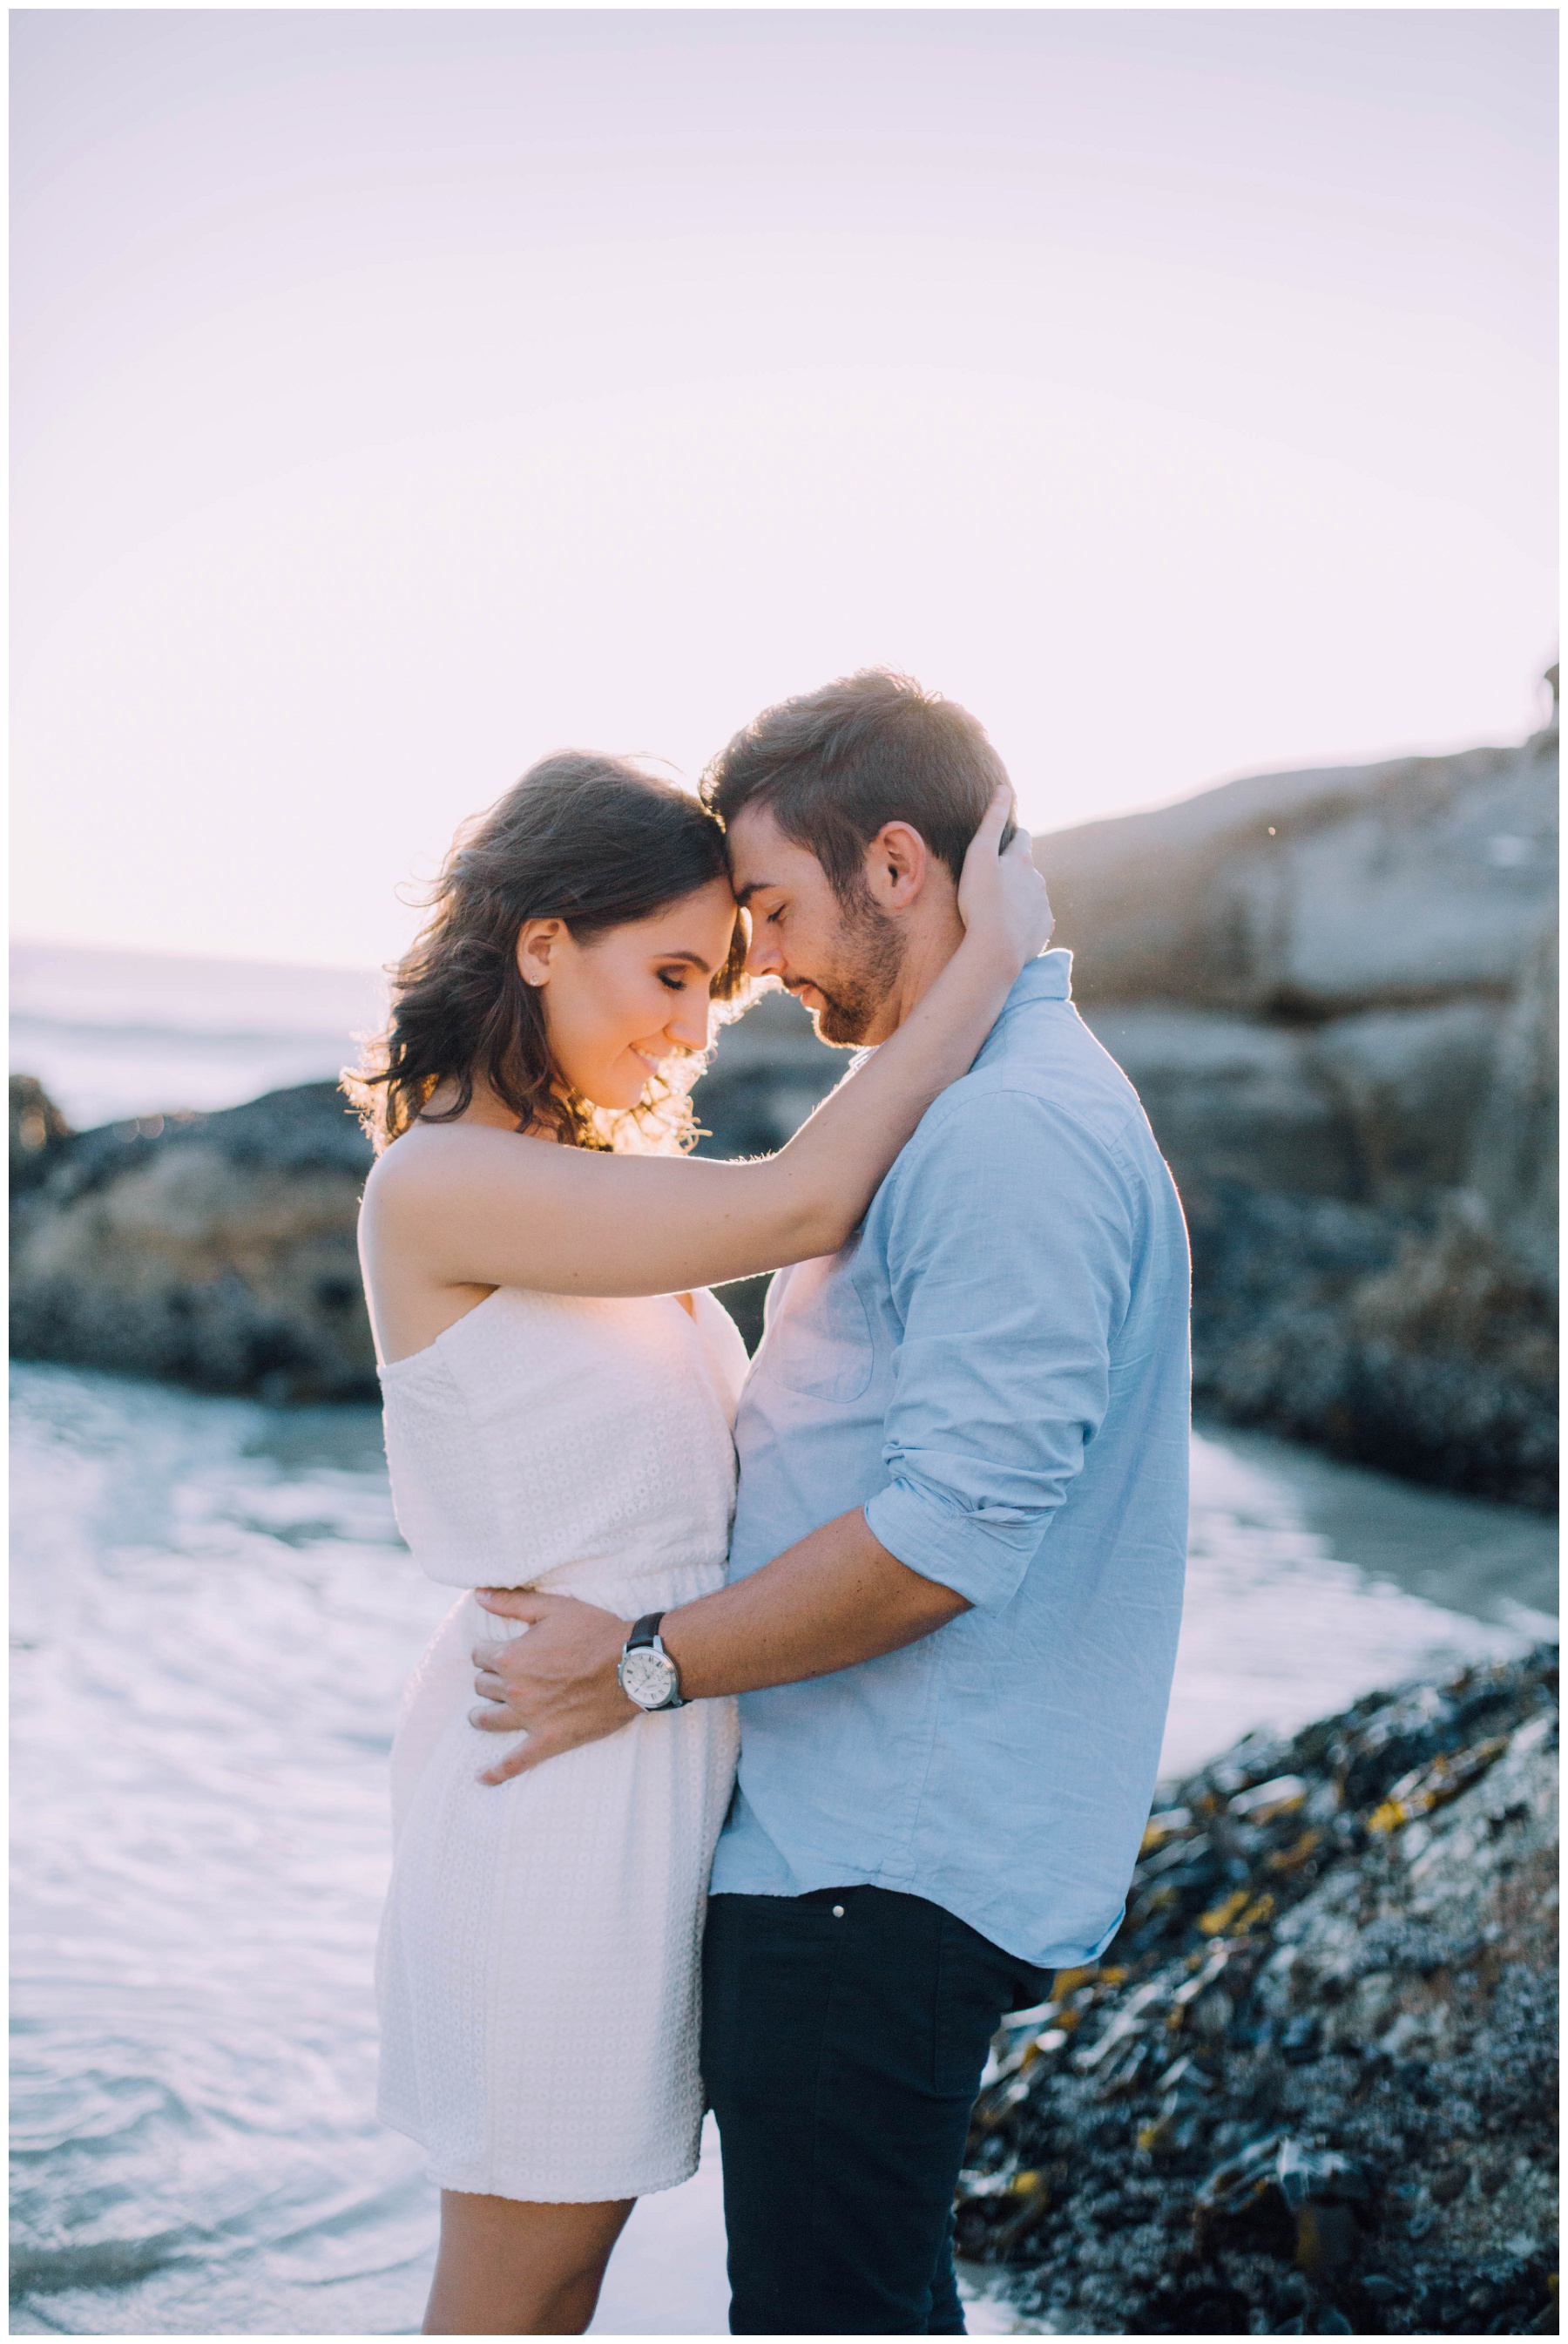 Ronel Kruger Cape Town Wedding and Lifestyle Photographer_8460.jpg